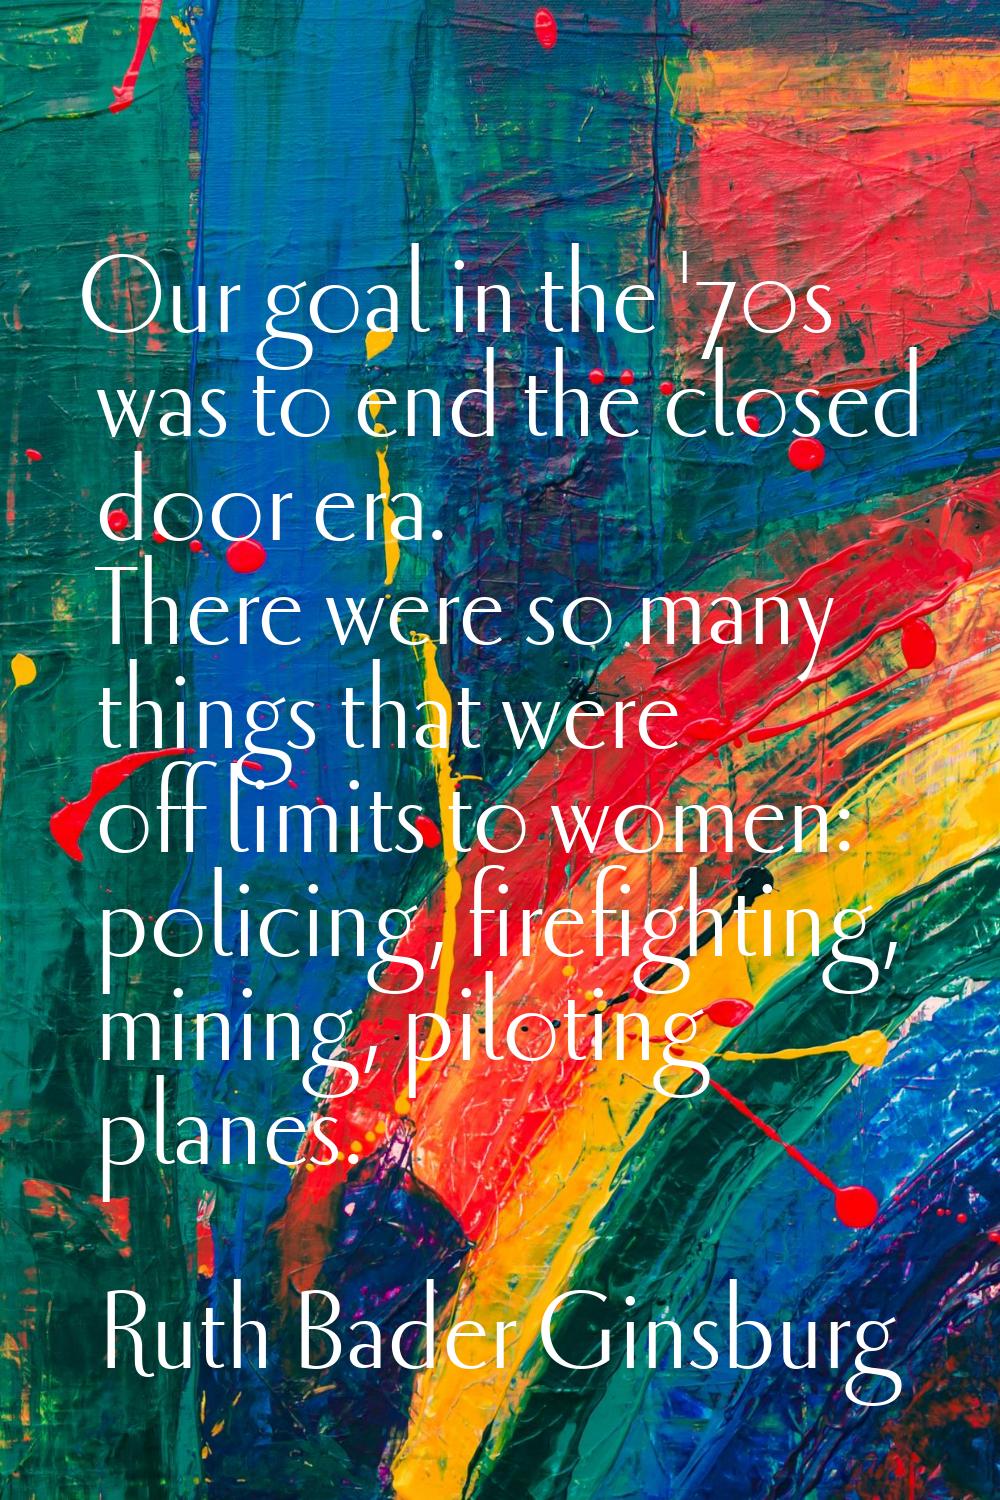 Our goal in the '70s was to end the closed door era. There were so many things that were off limits